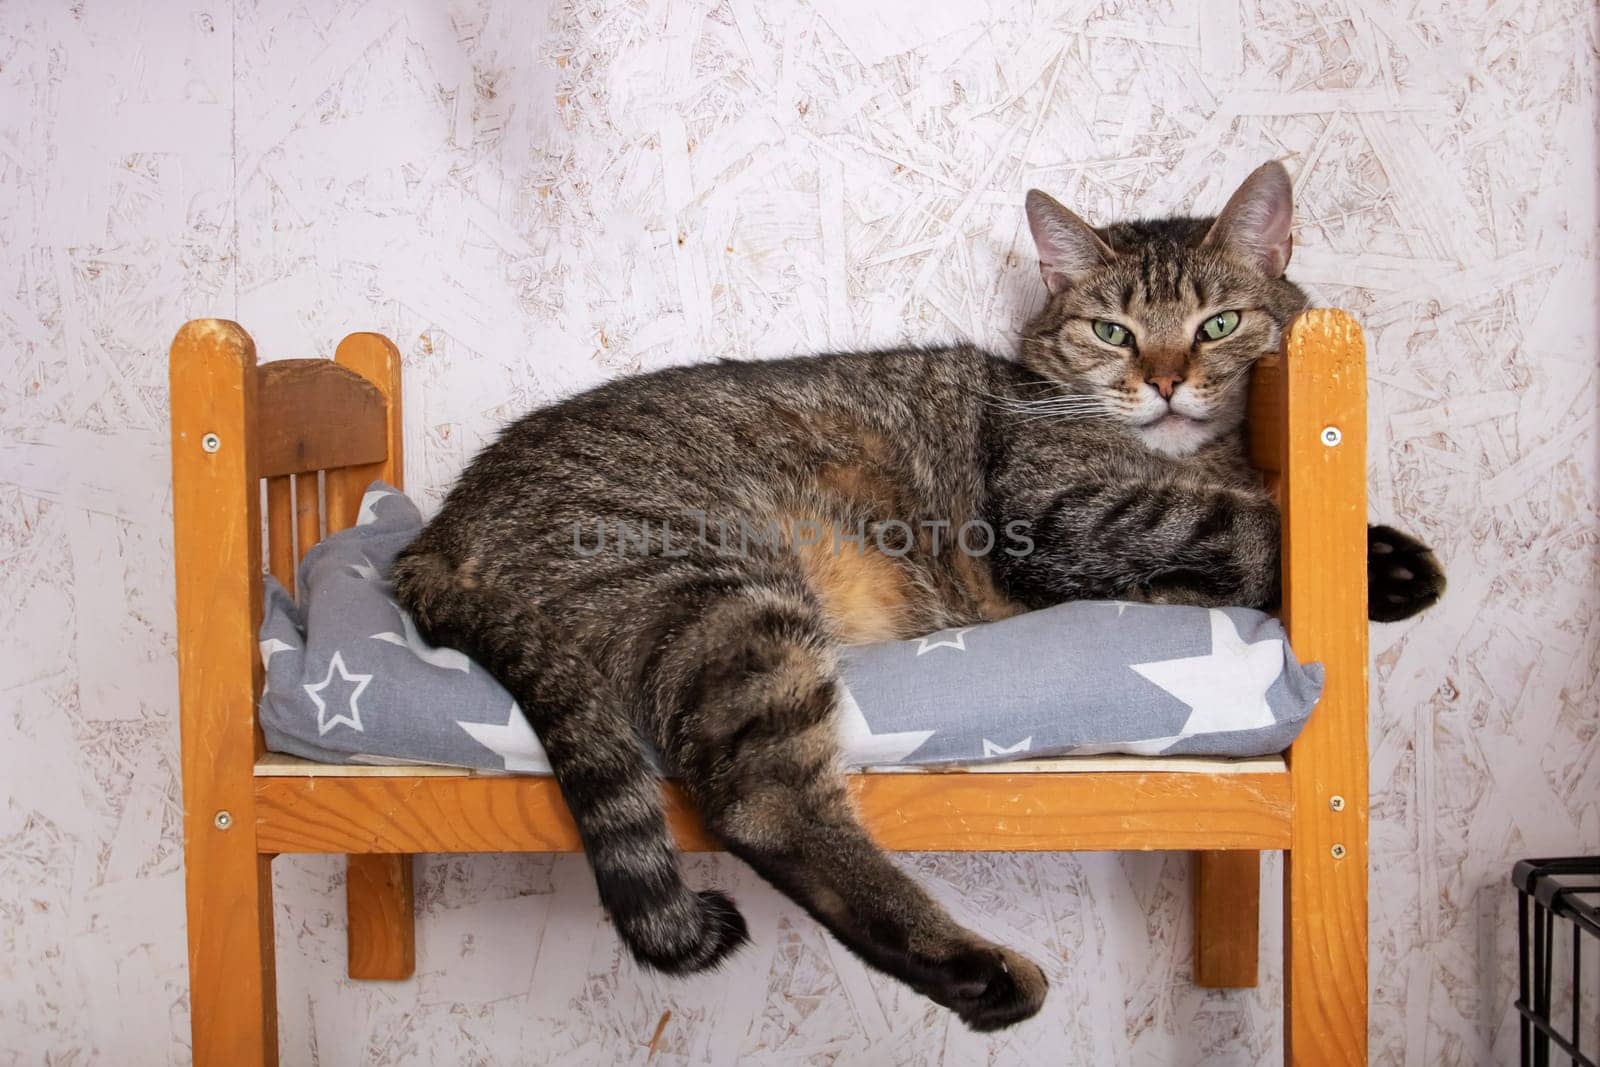 A Domestic shorthaired cat, a small to mediumsized Felidae carnivore, is lounging on a wooden bed by the window. Its whiskers twitch as its tail sways lazily